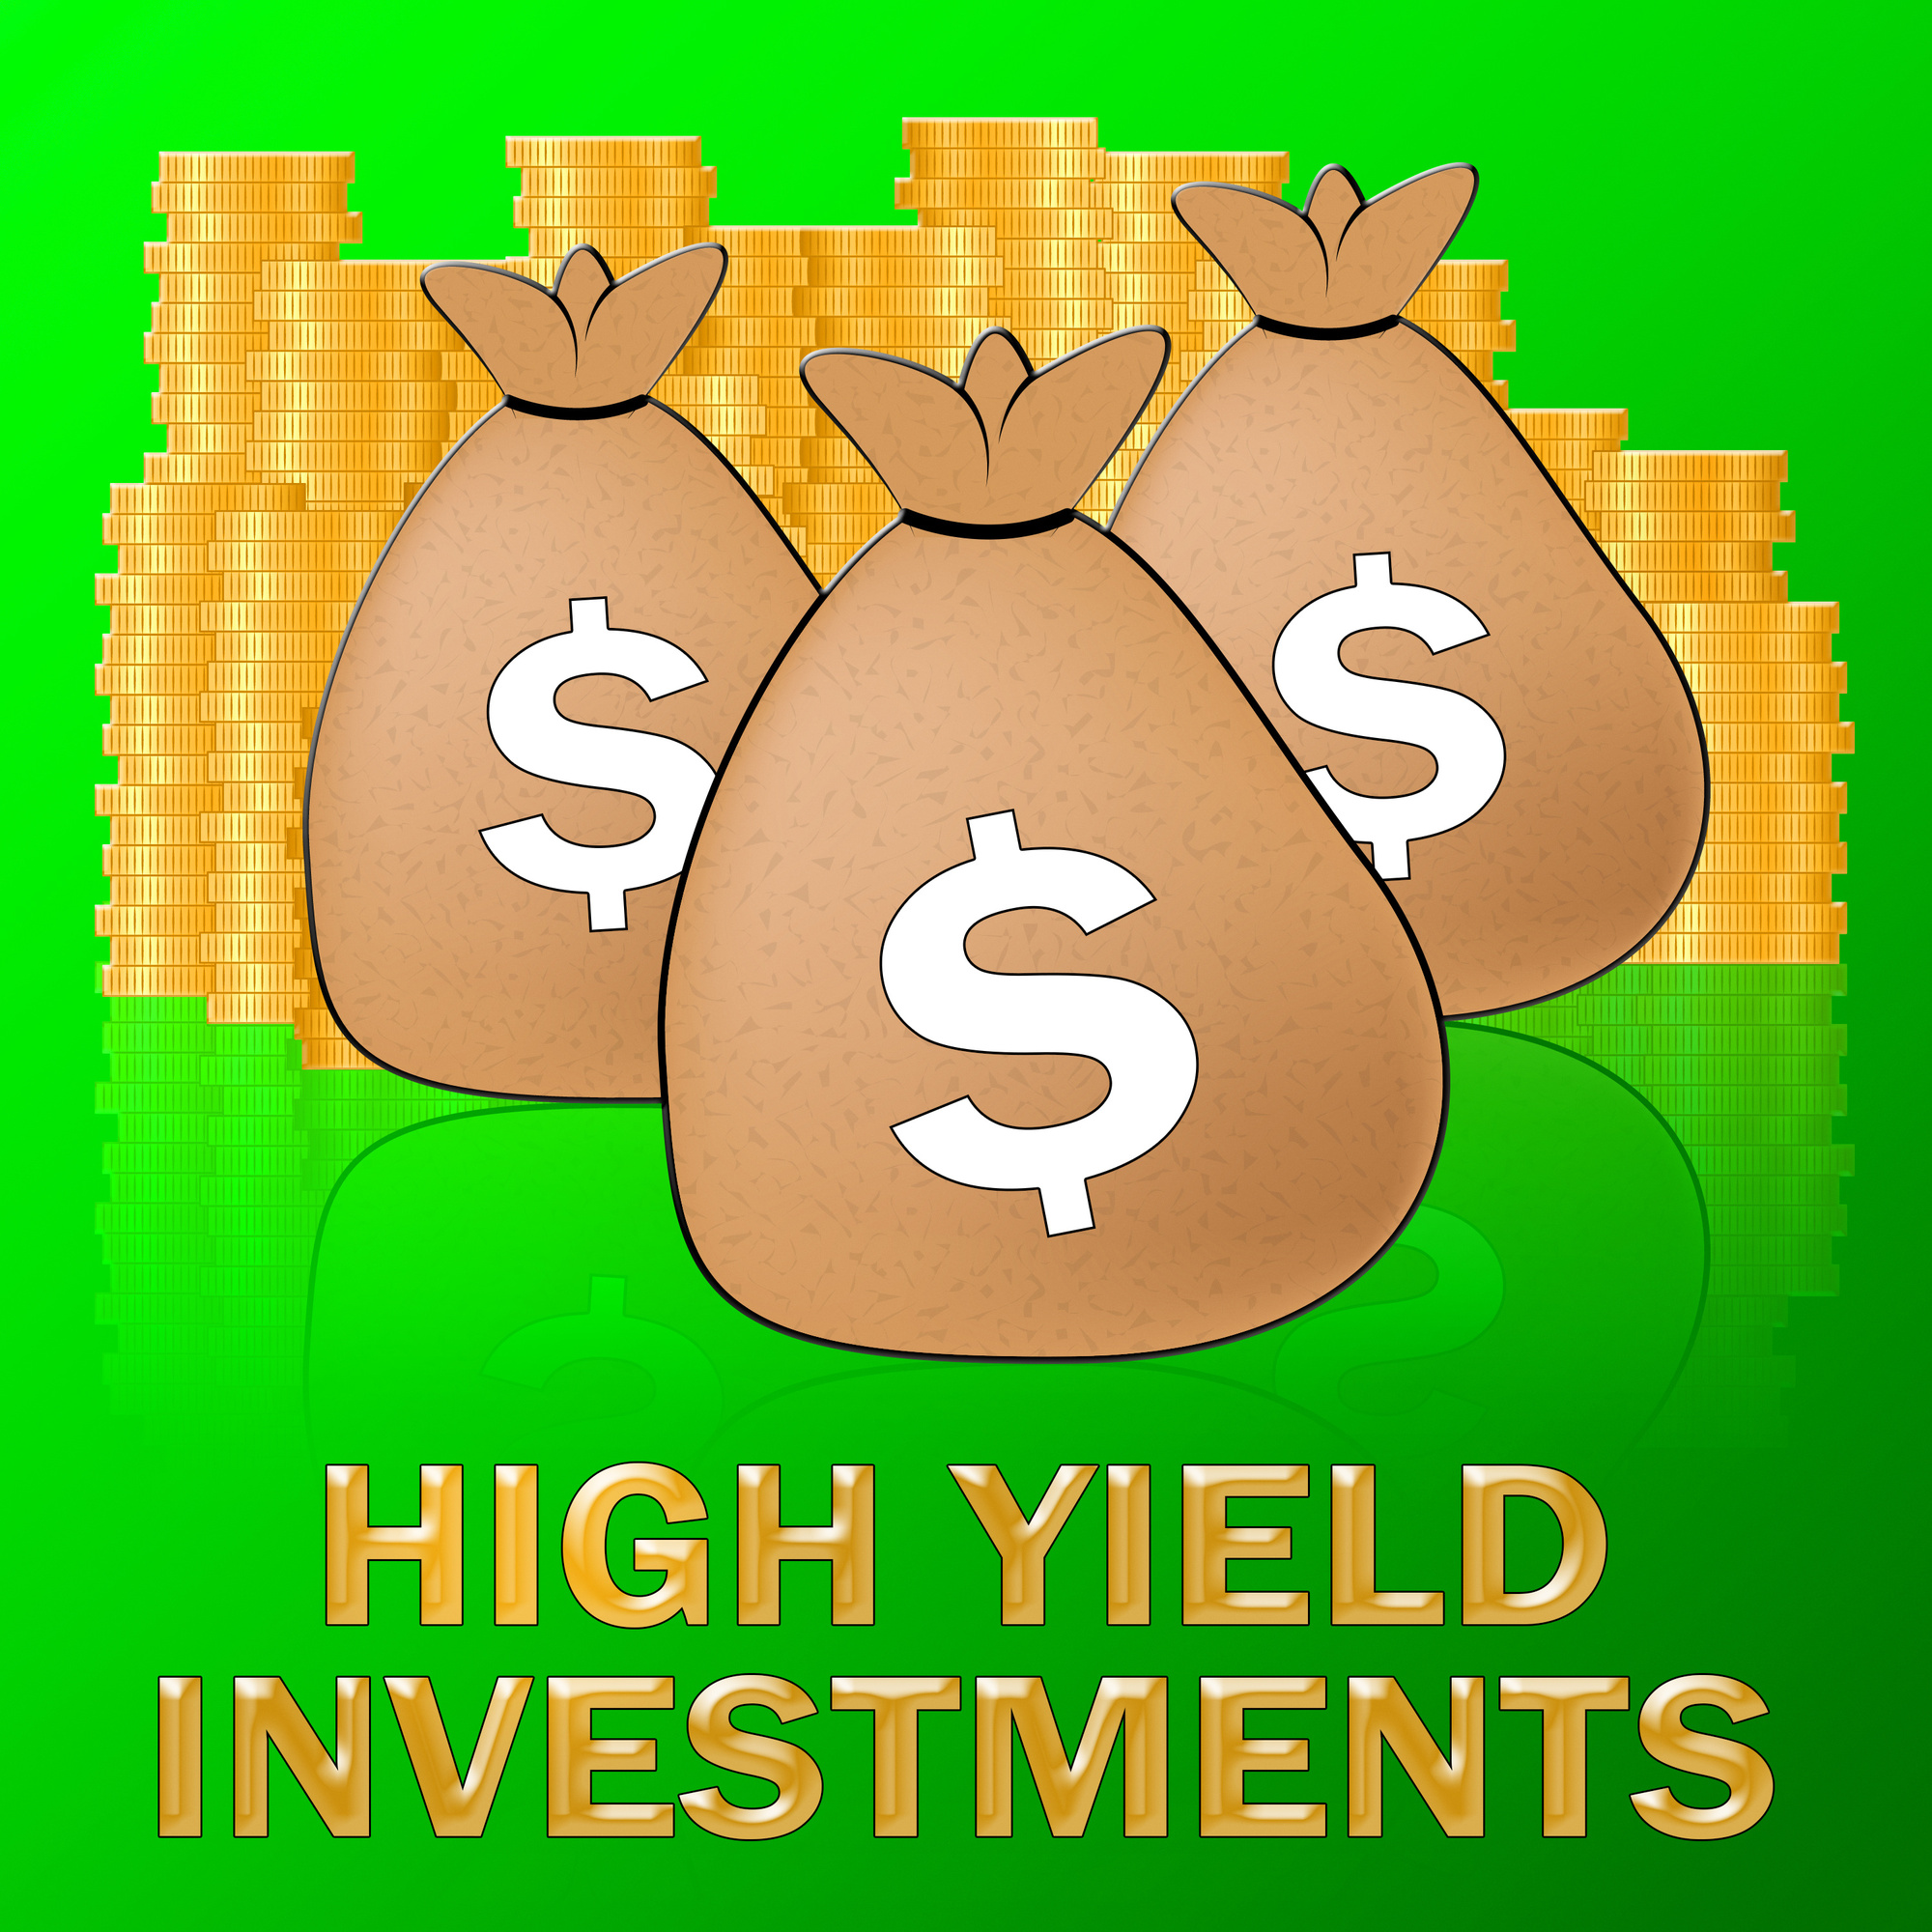 10 High Yield Investments for a Safe Return